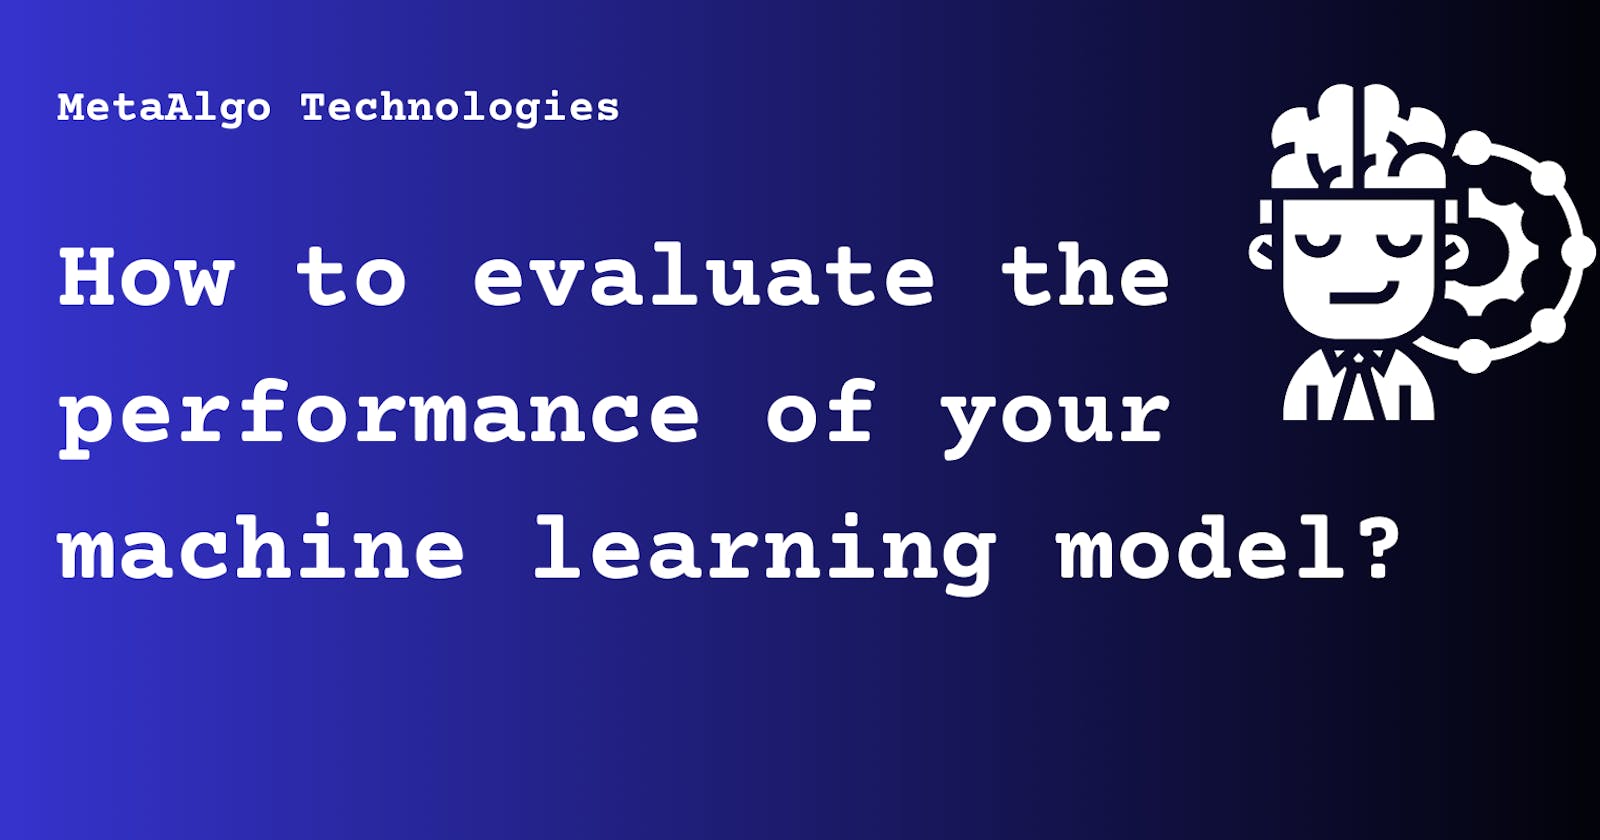 How to evaluate the performance of your machine learning model?